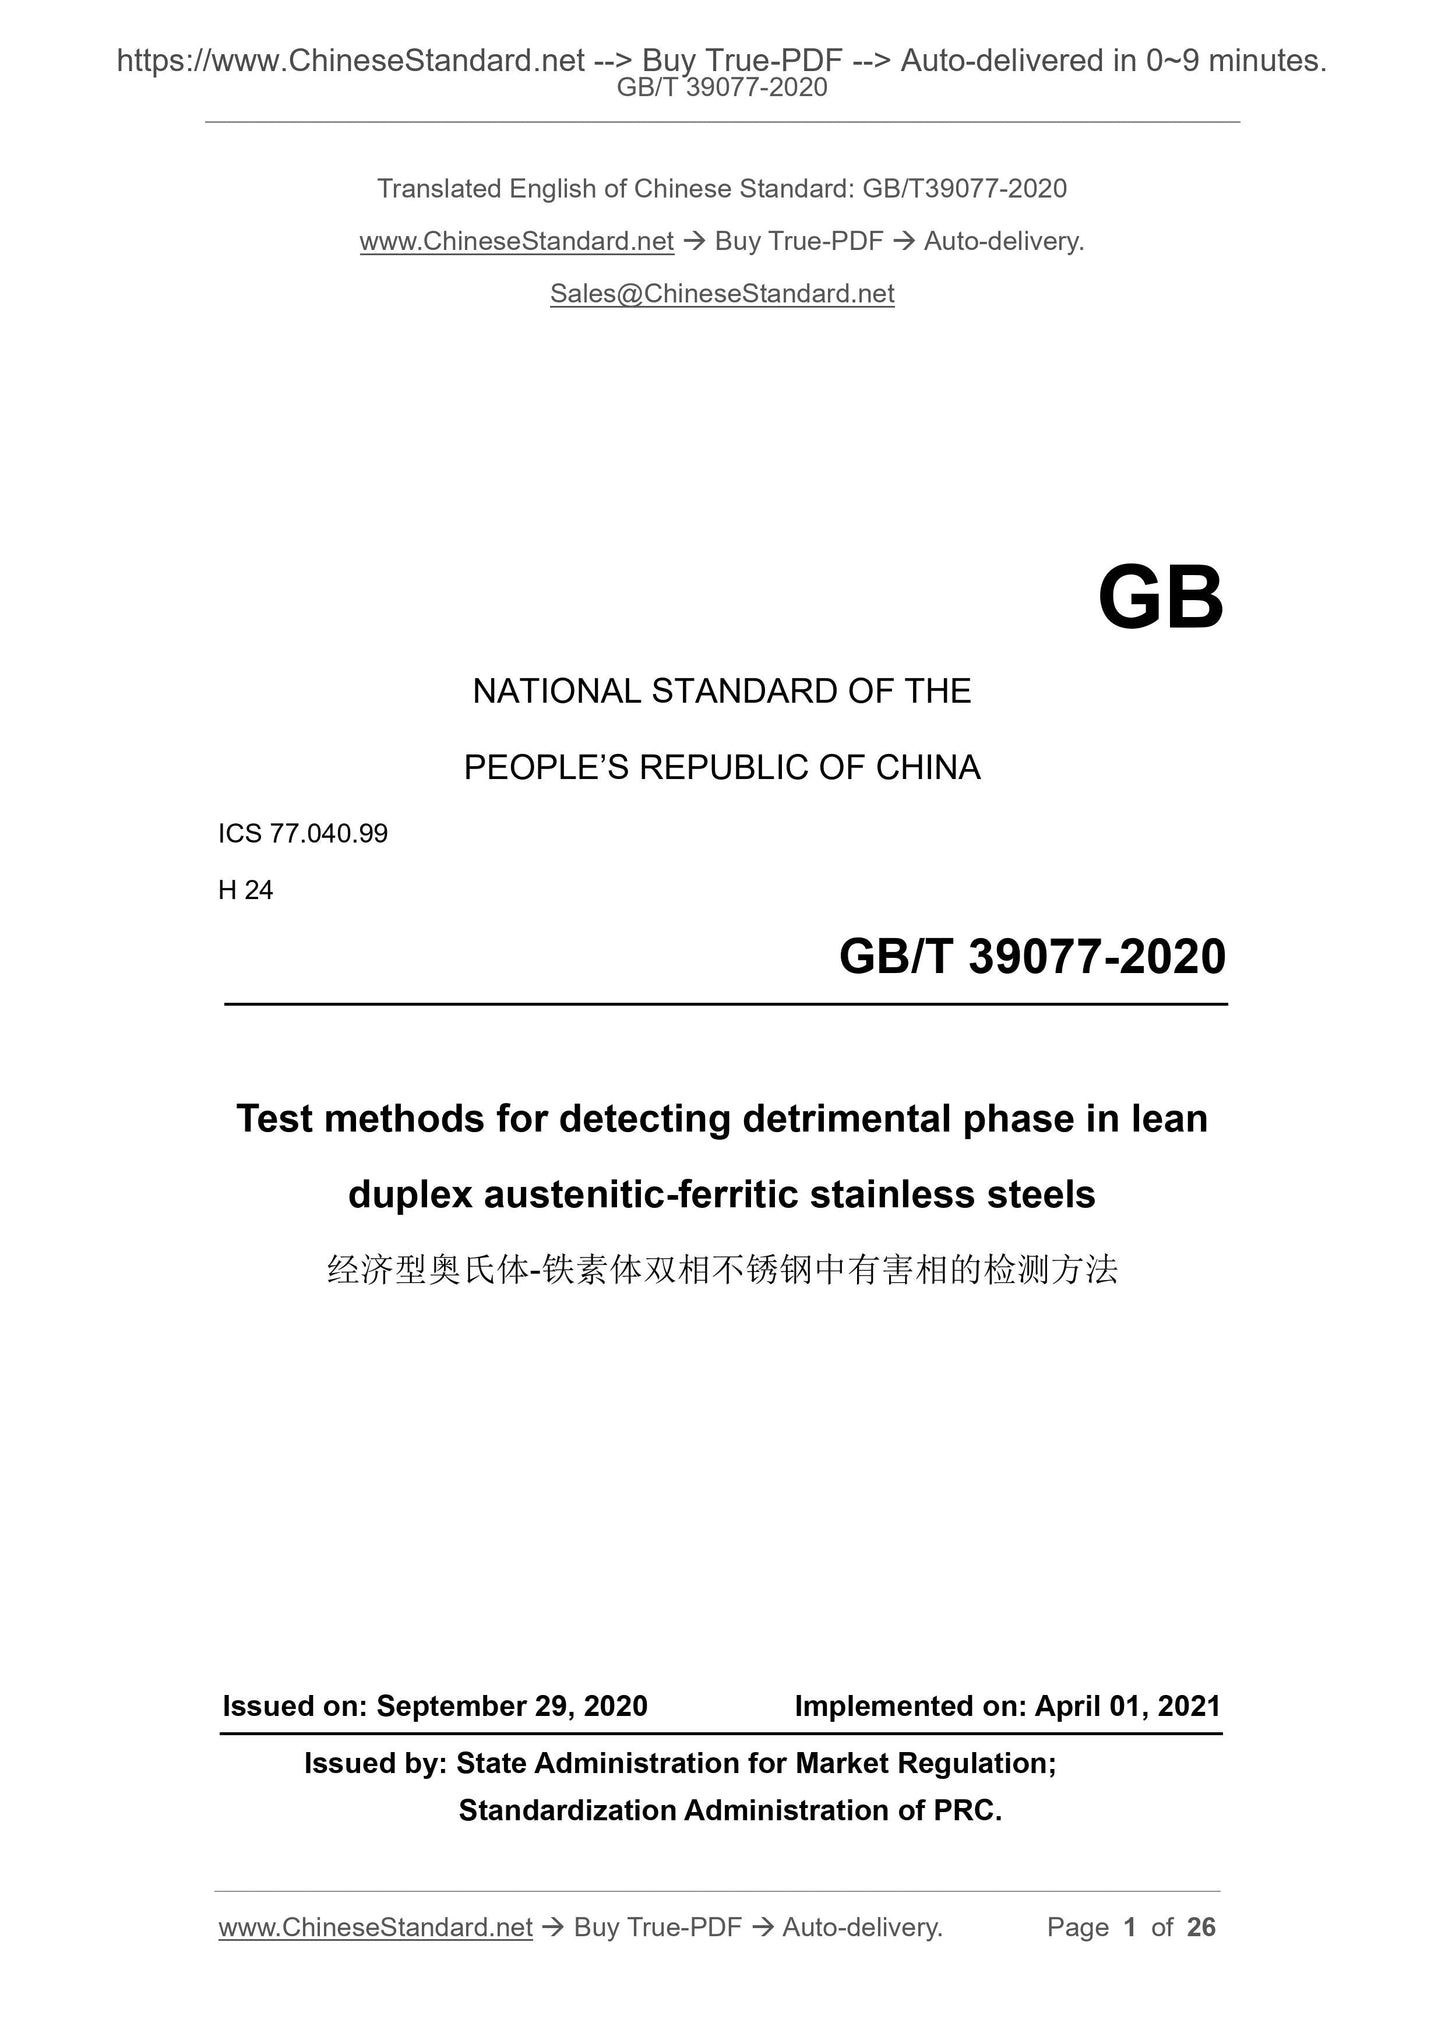 GB/T 39077-2020 Page 1